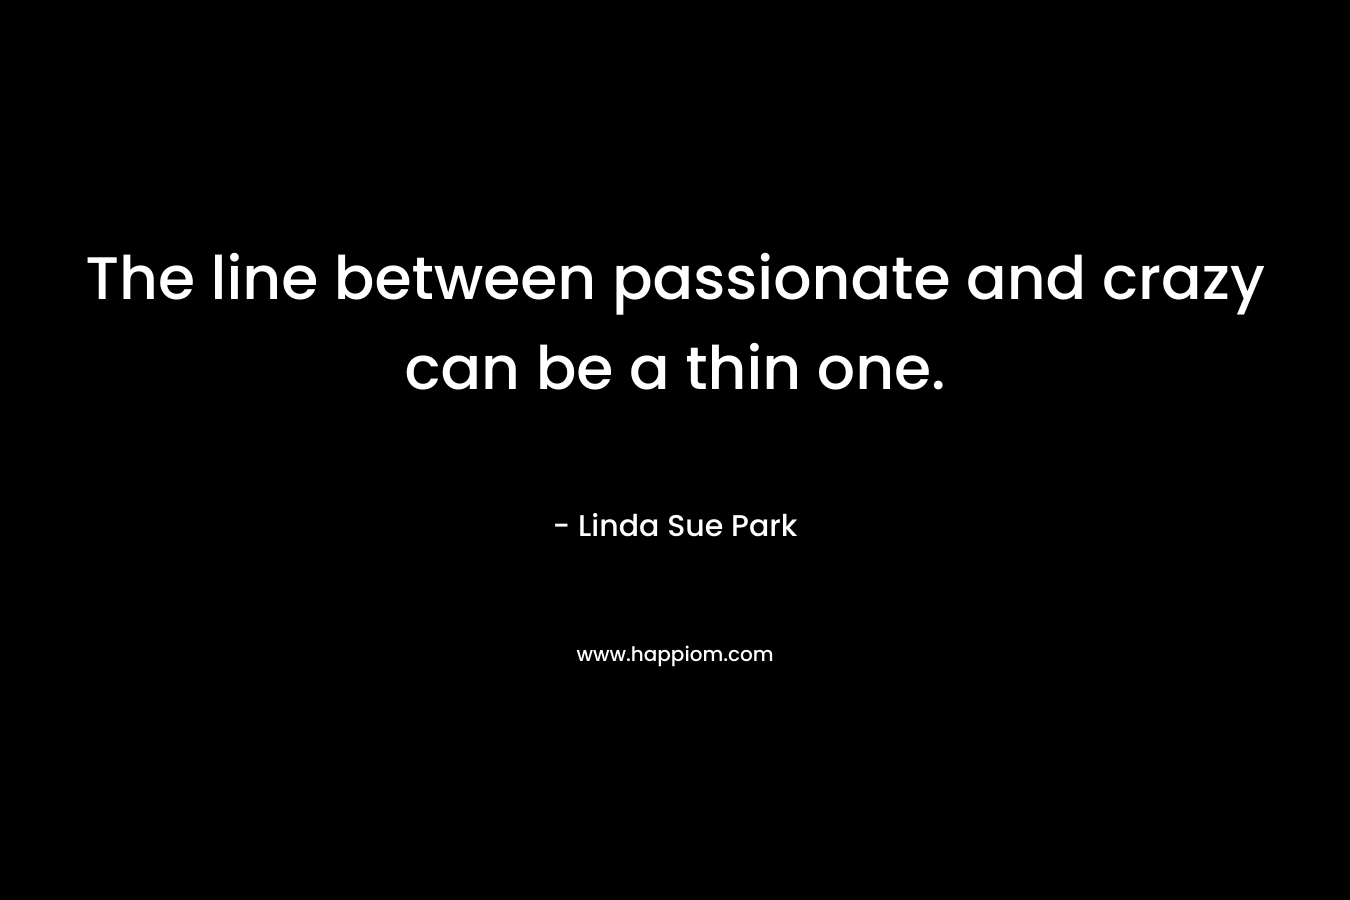 The line between passionate and crazy can be a thin one.